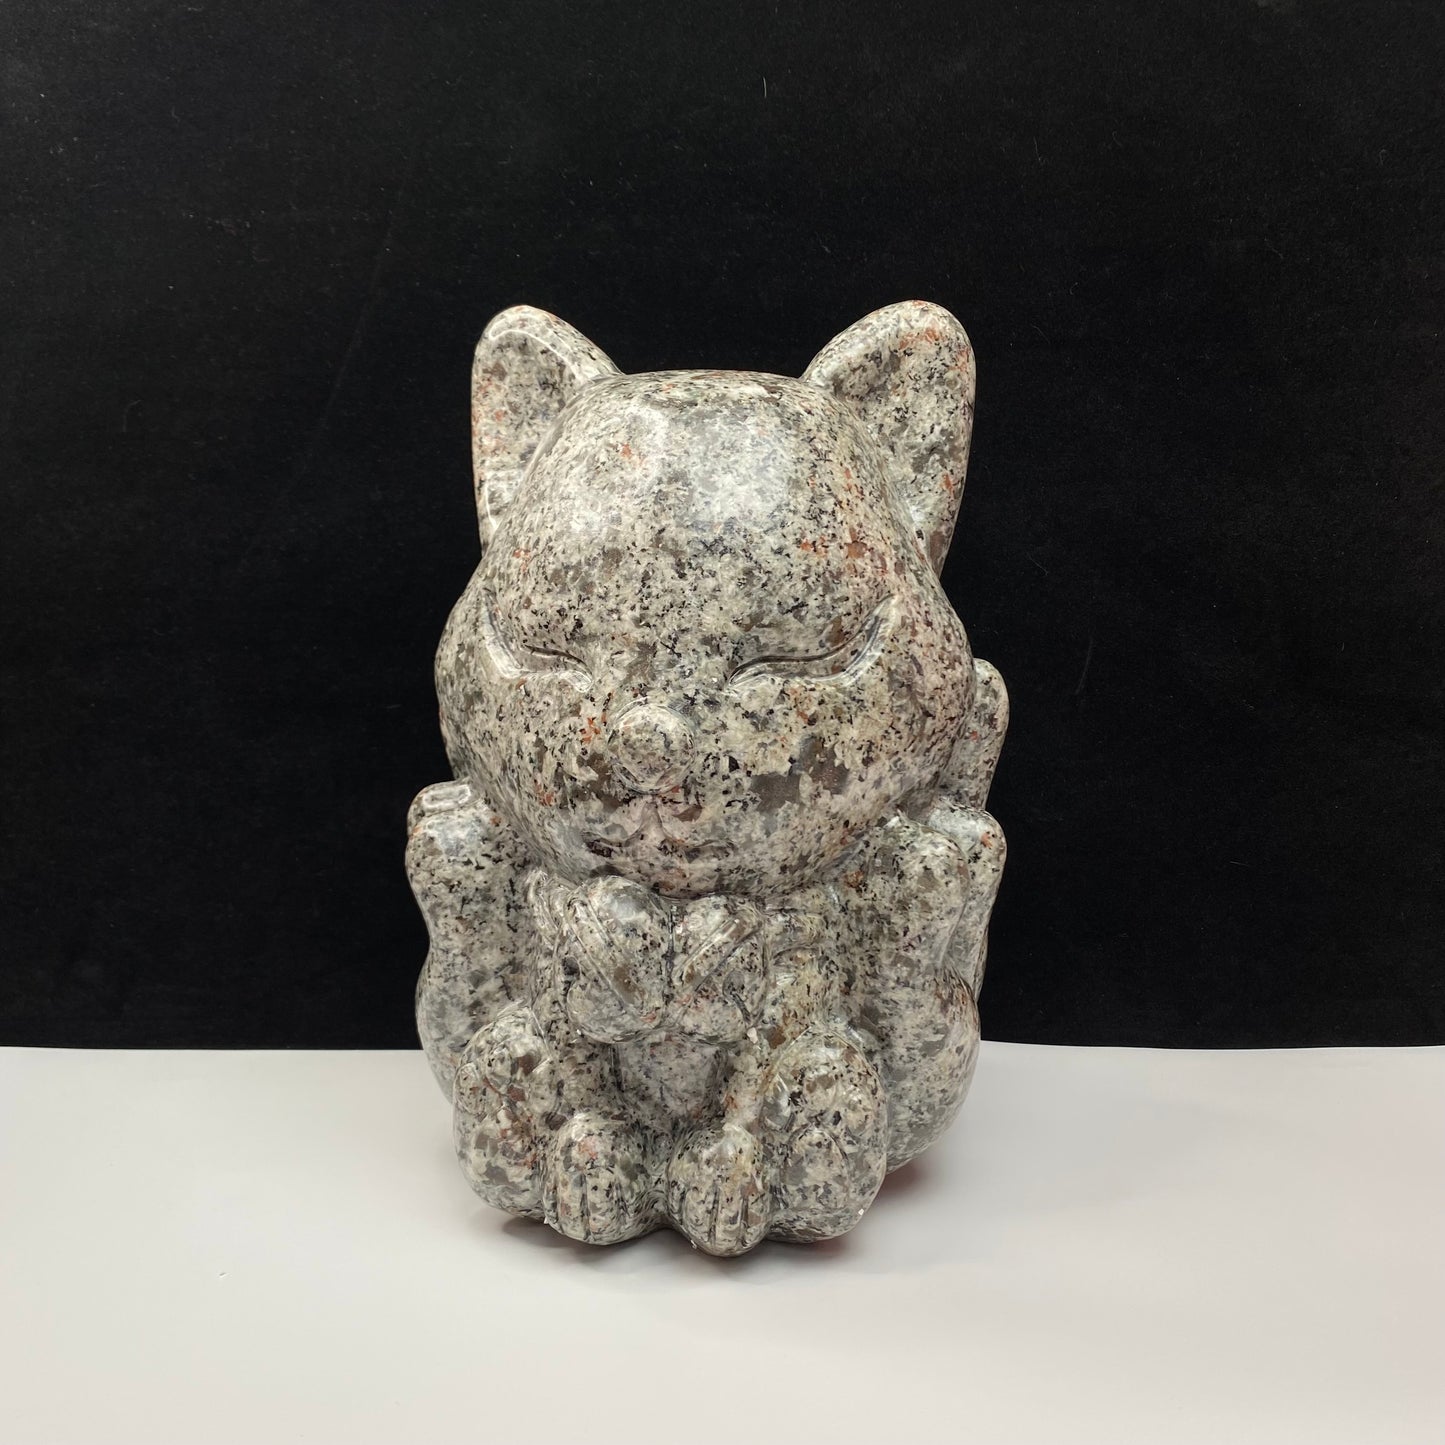 507-MeowCrystal Mega Carving Party Flash Sale